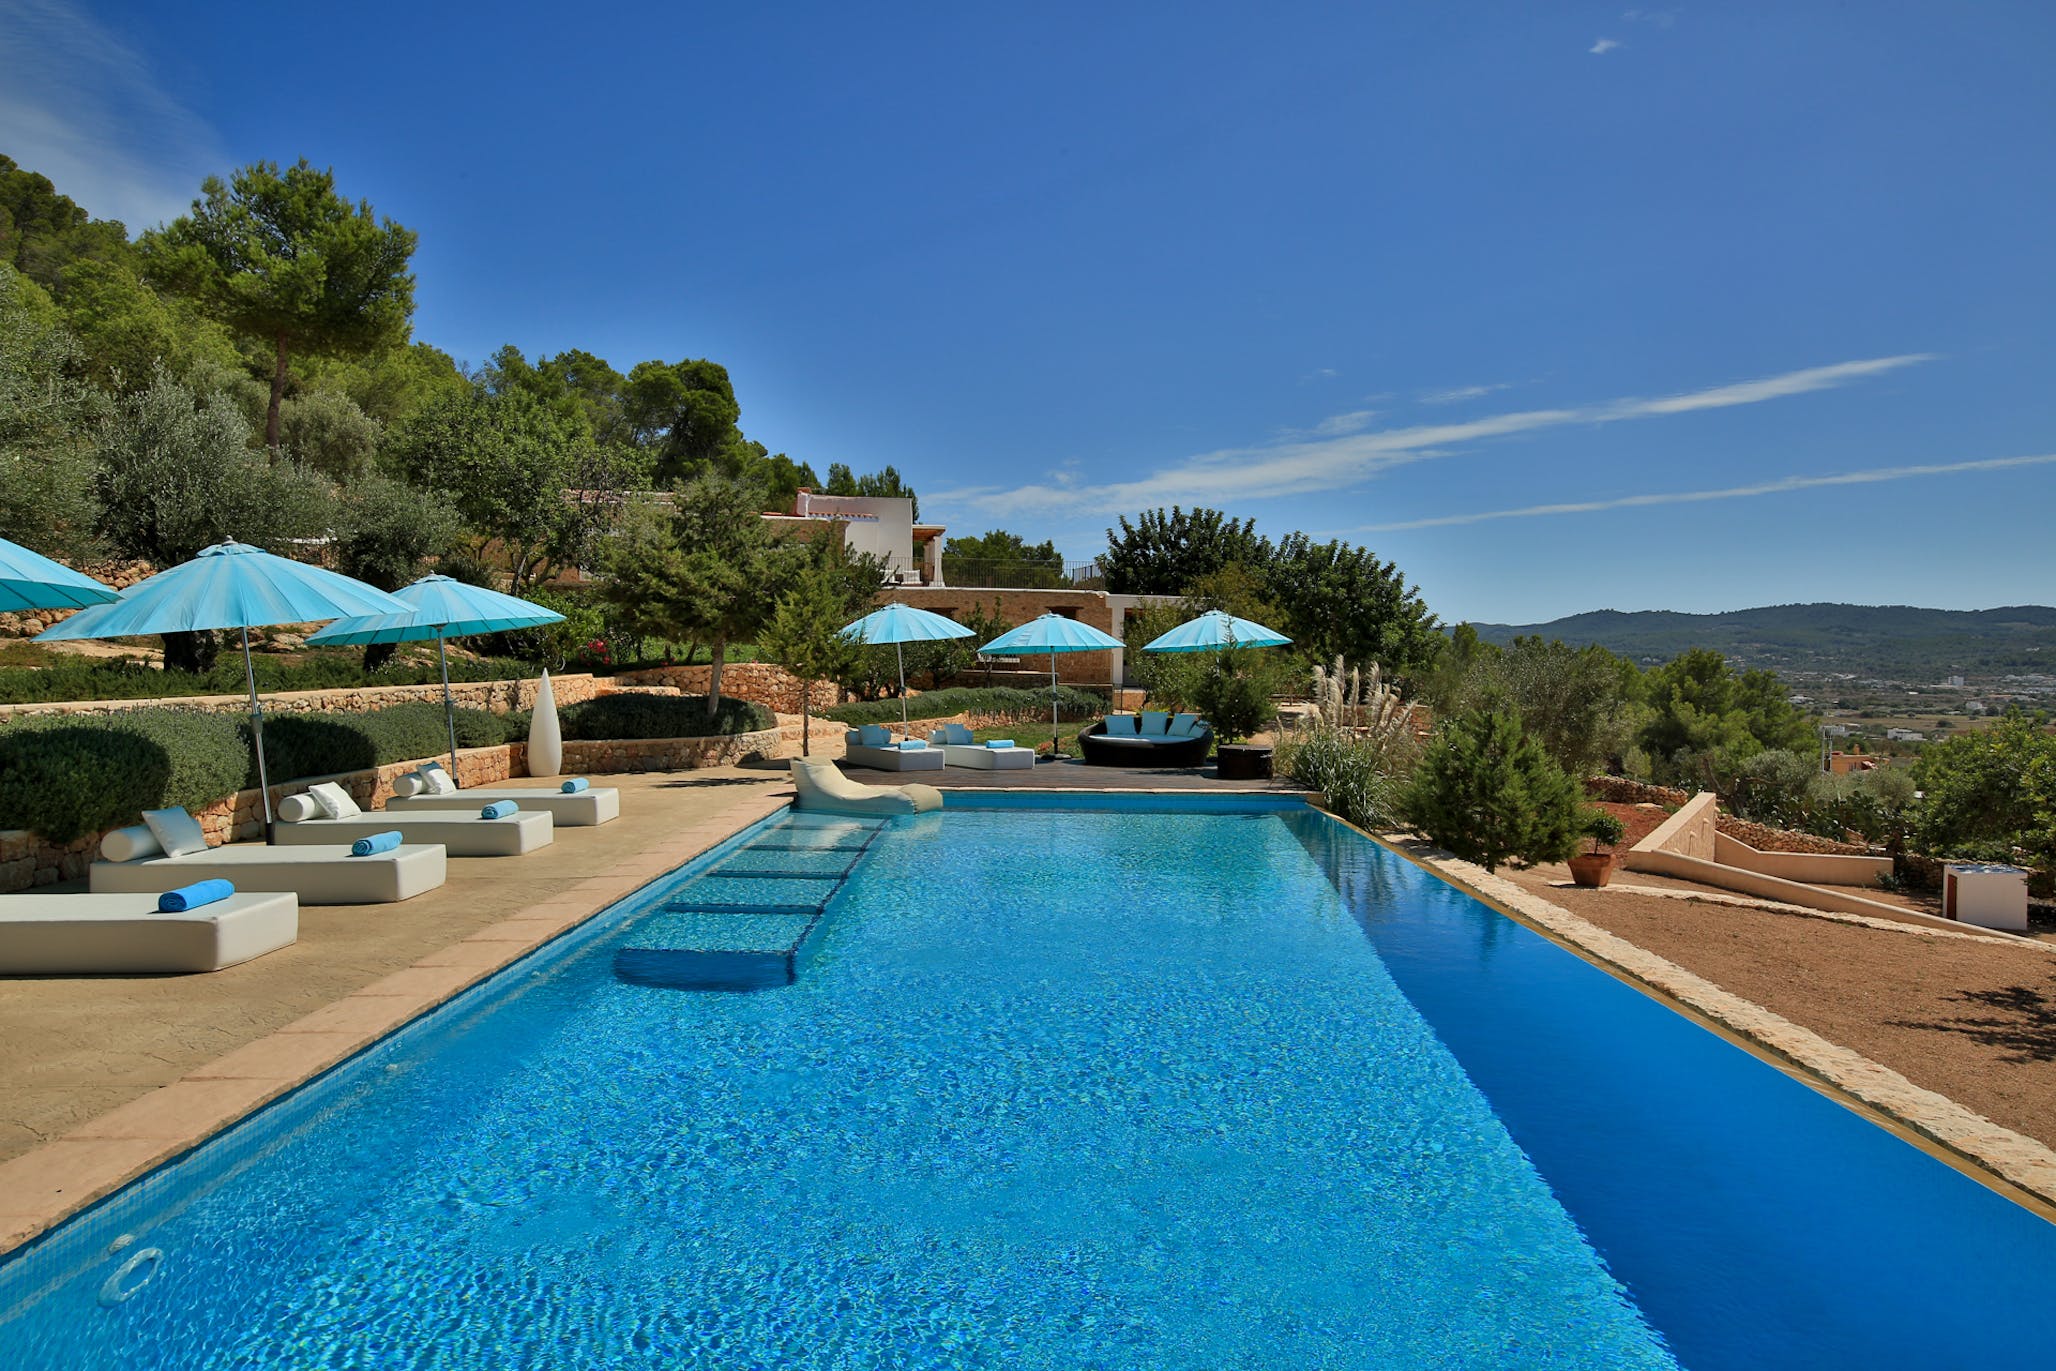 You are currently viewing Can Rosetta – ‘Classically reformed Ibiza finca with sweeping views over San Antonio Bay.’